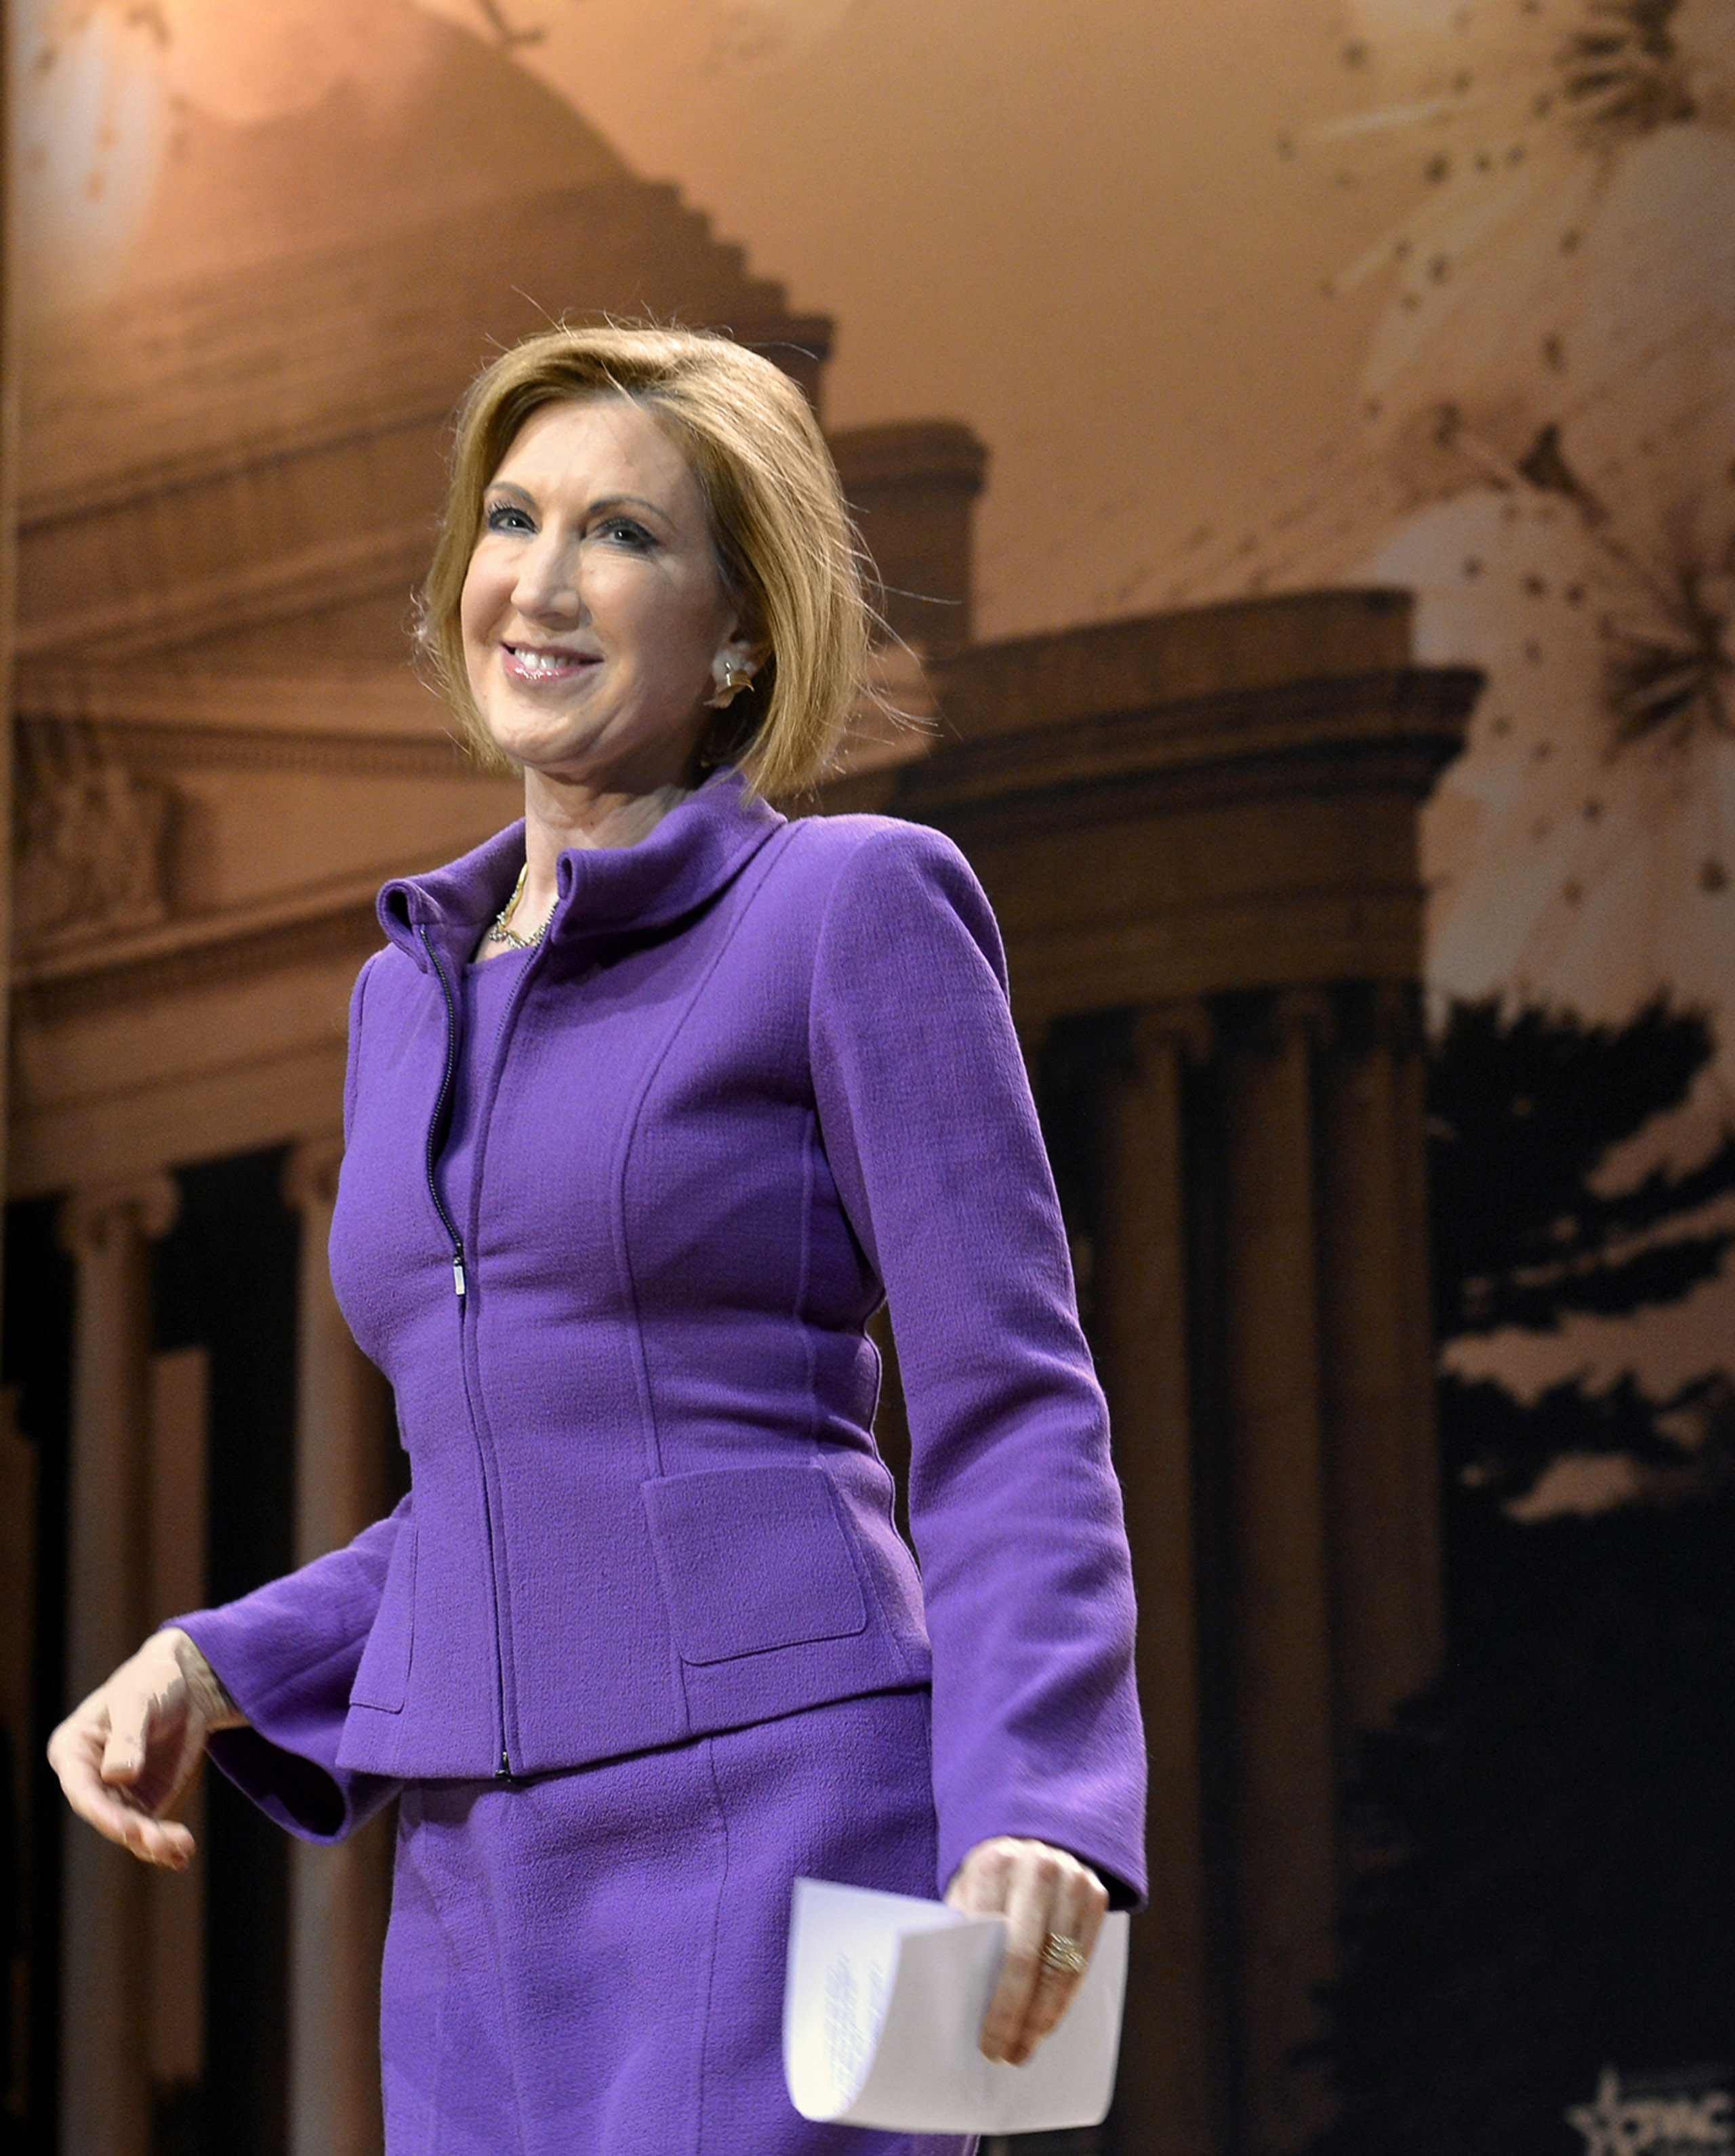 Carly Fiorina attends Conservative Political Action Conference in Oxon Hill